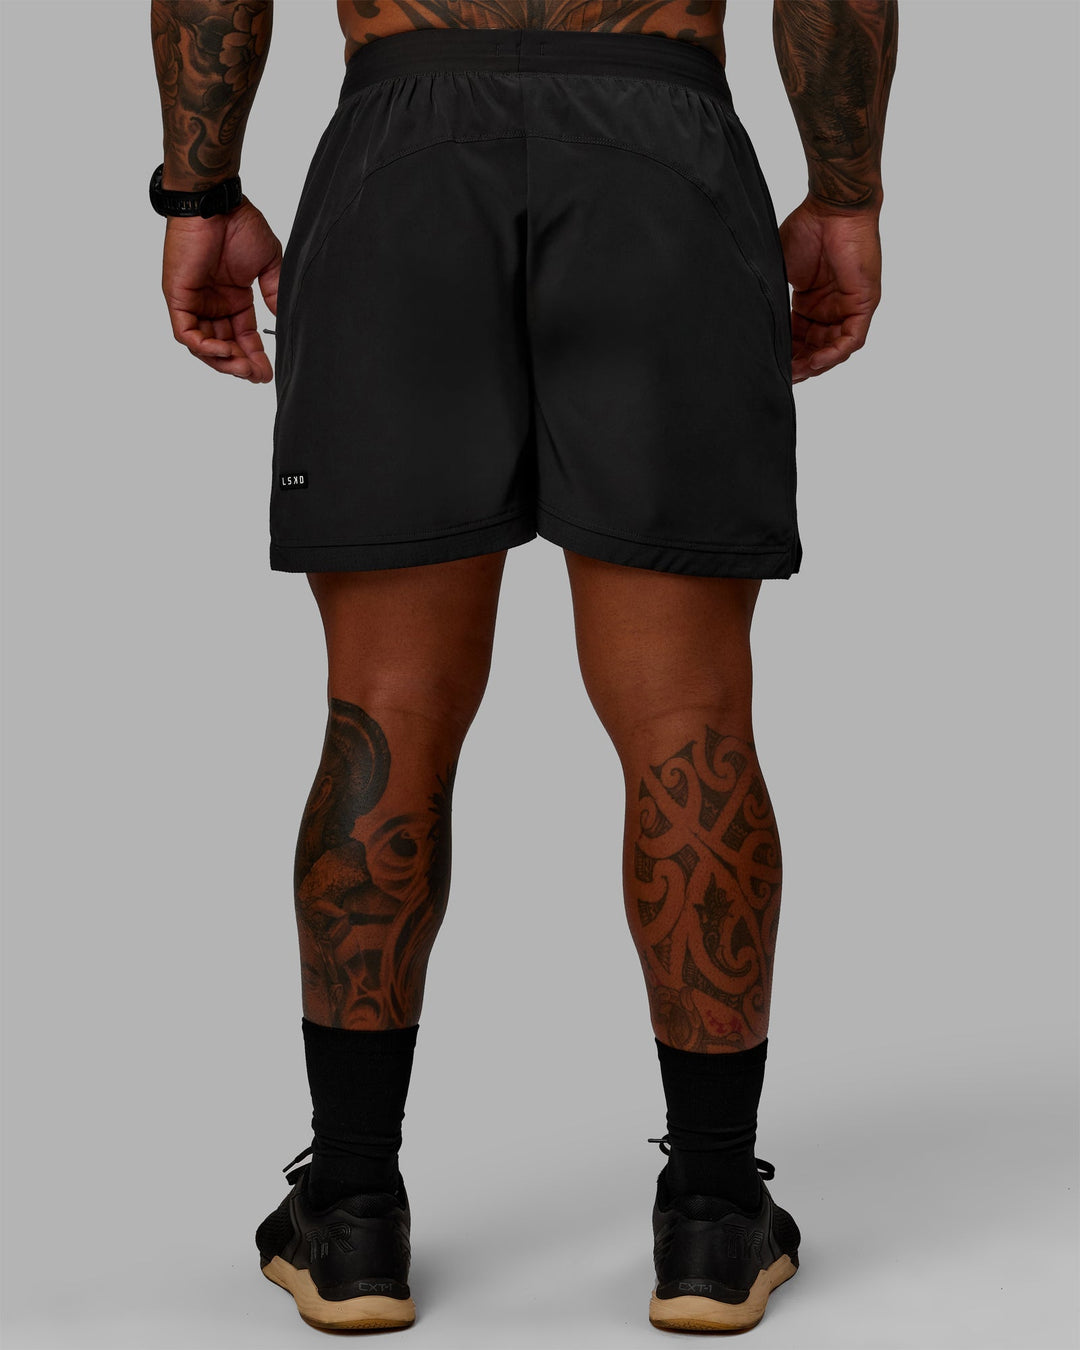 Man wearing Challenger 6" Lined Performance Shorts - Pirate Black